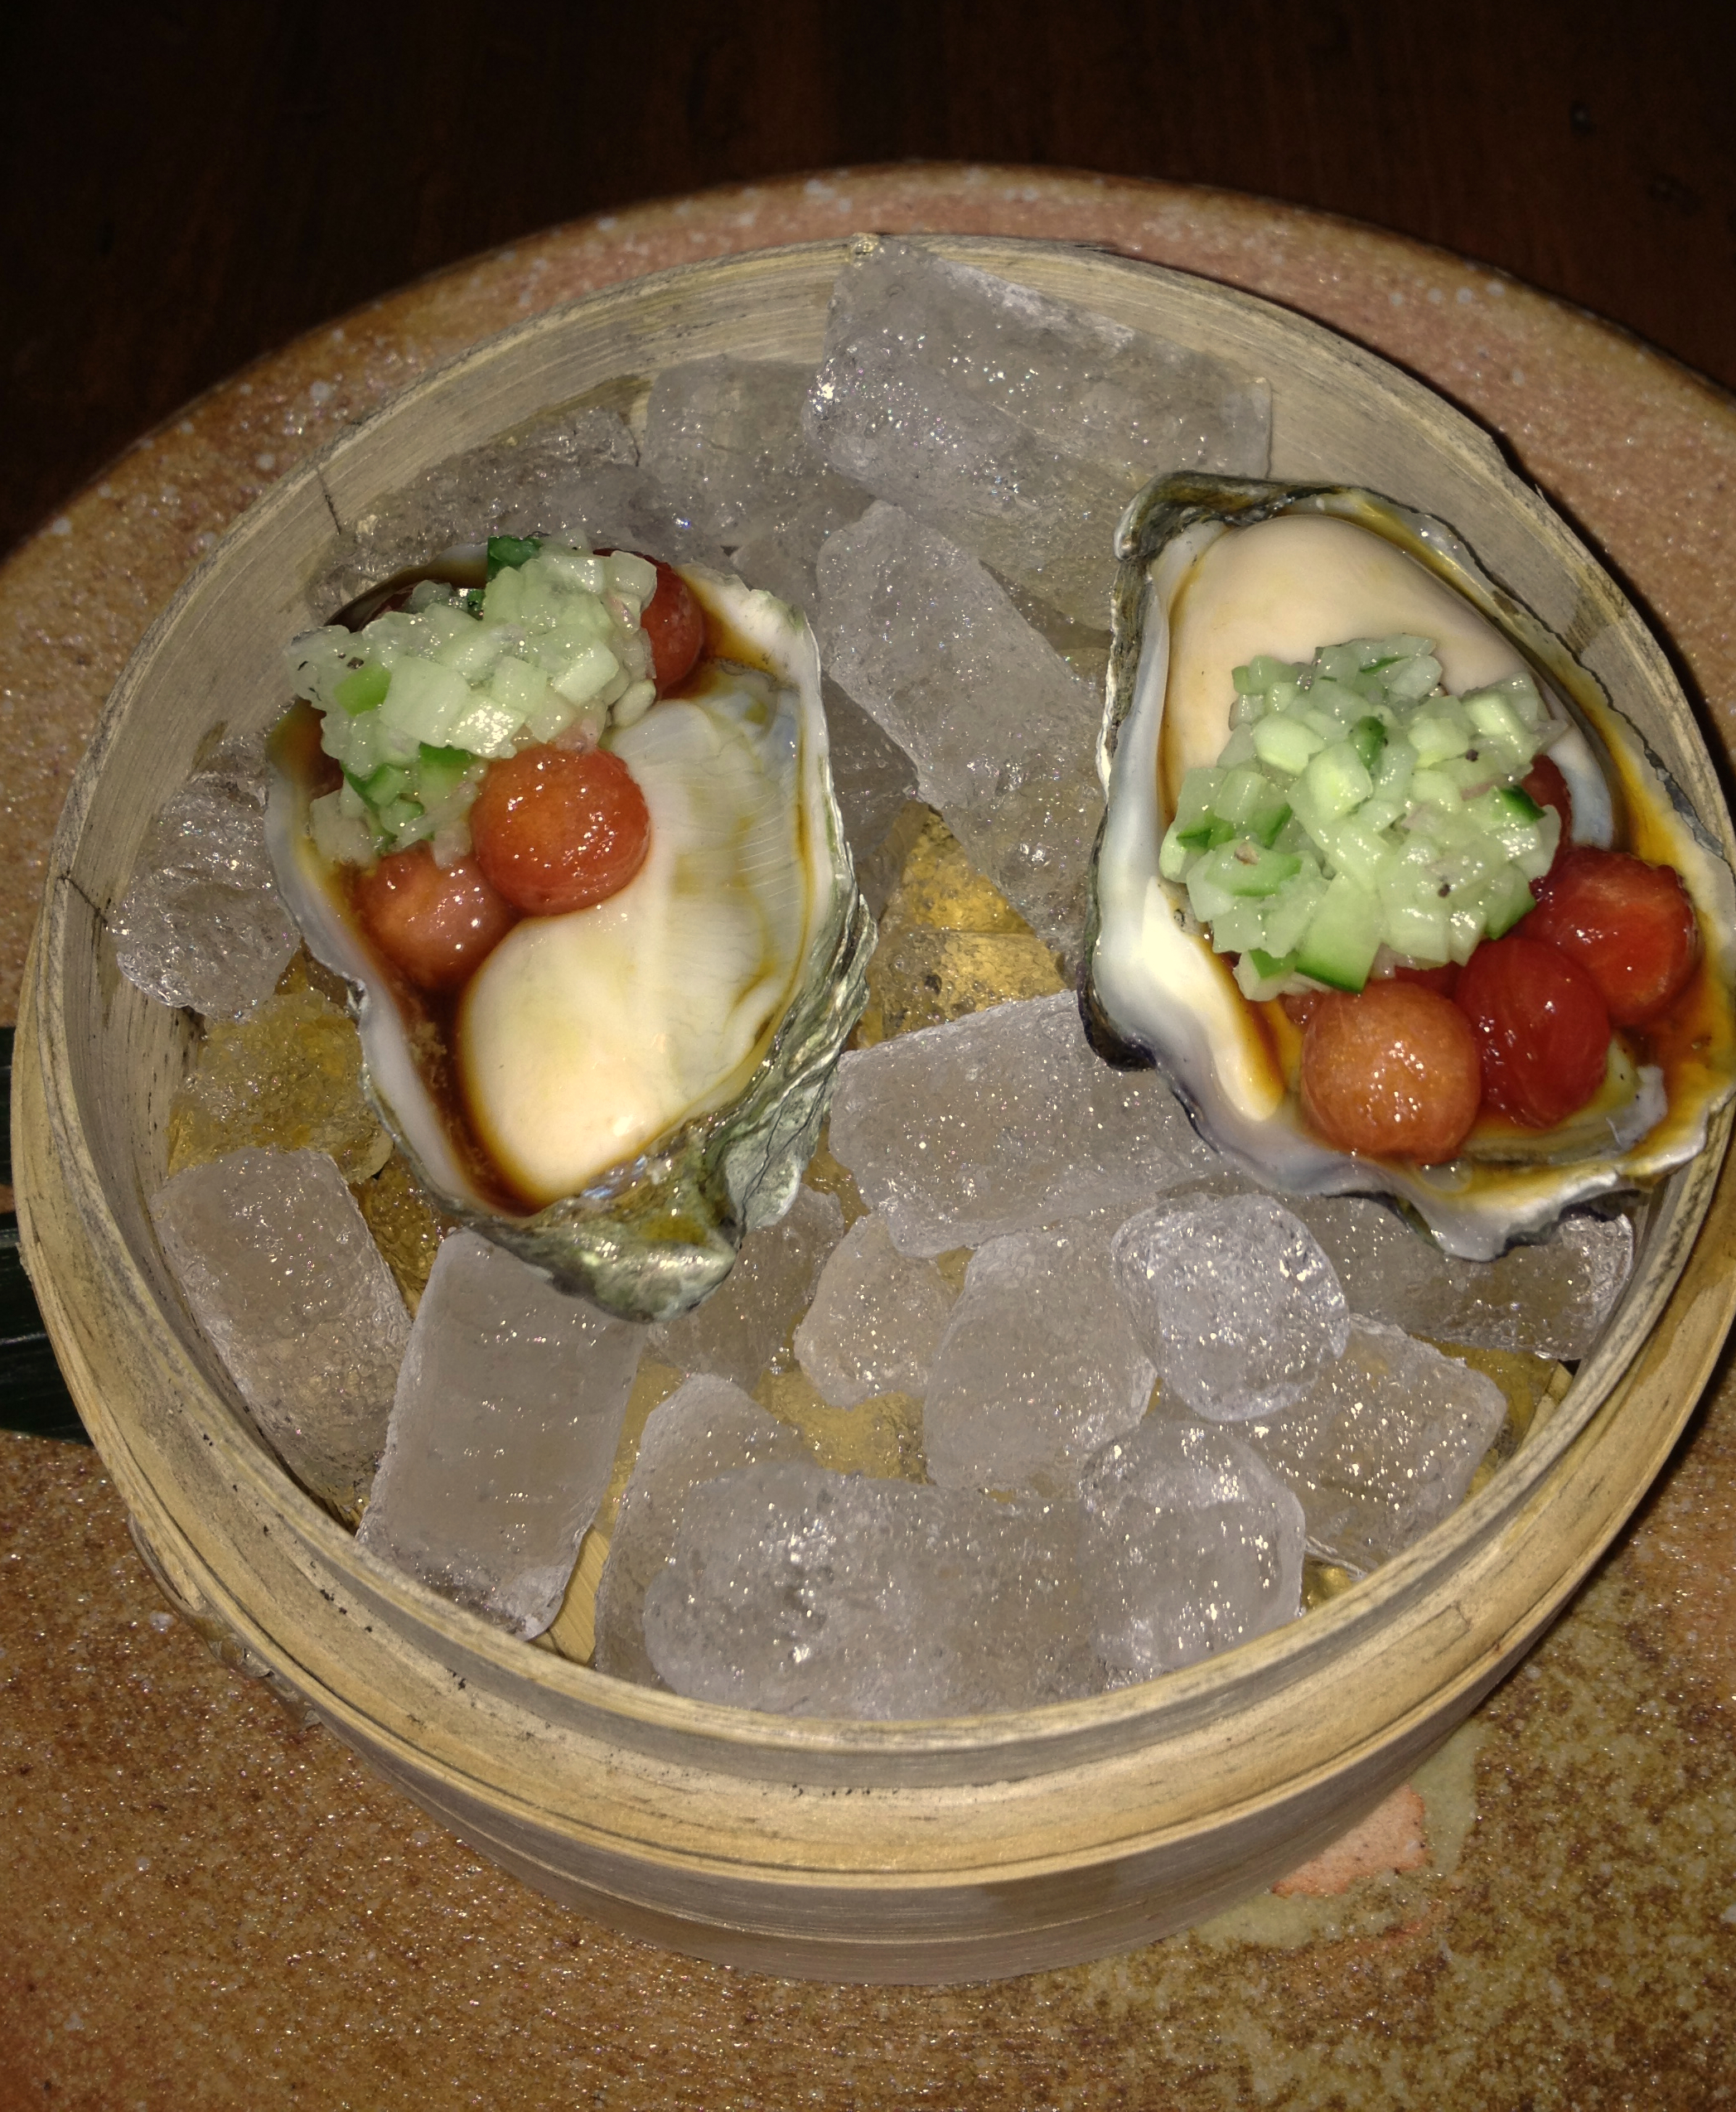 Kumamoto Oyster with watermelon pearls, cucumber mignonette